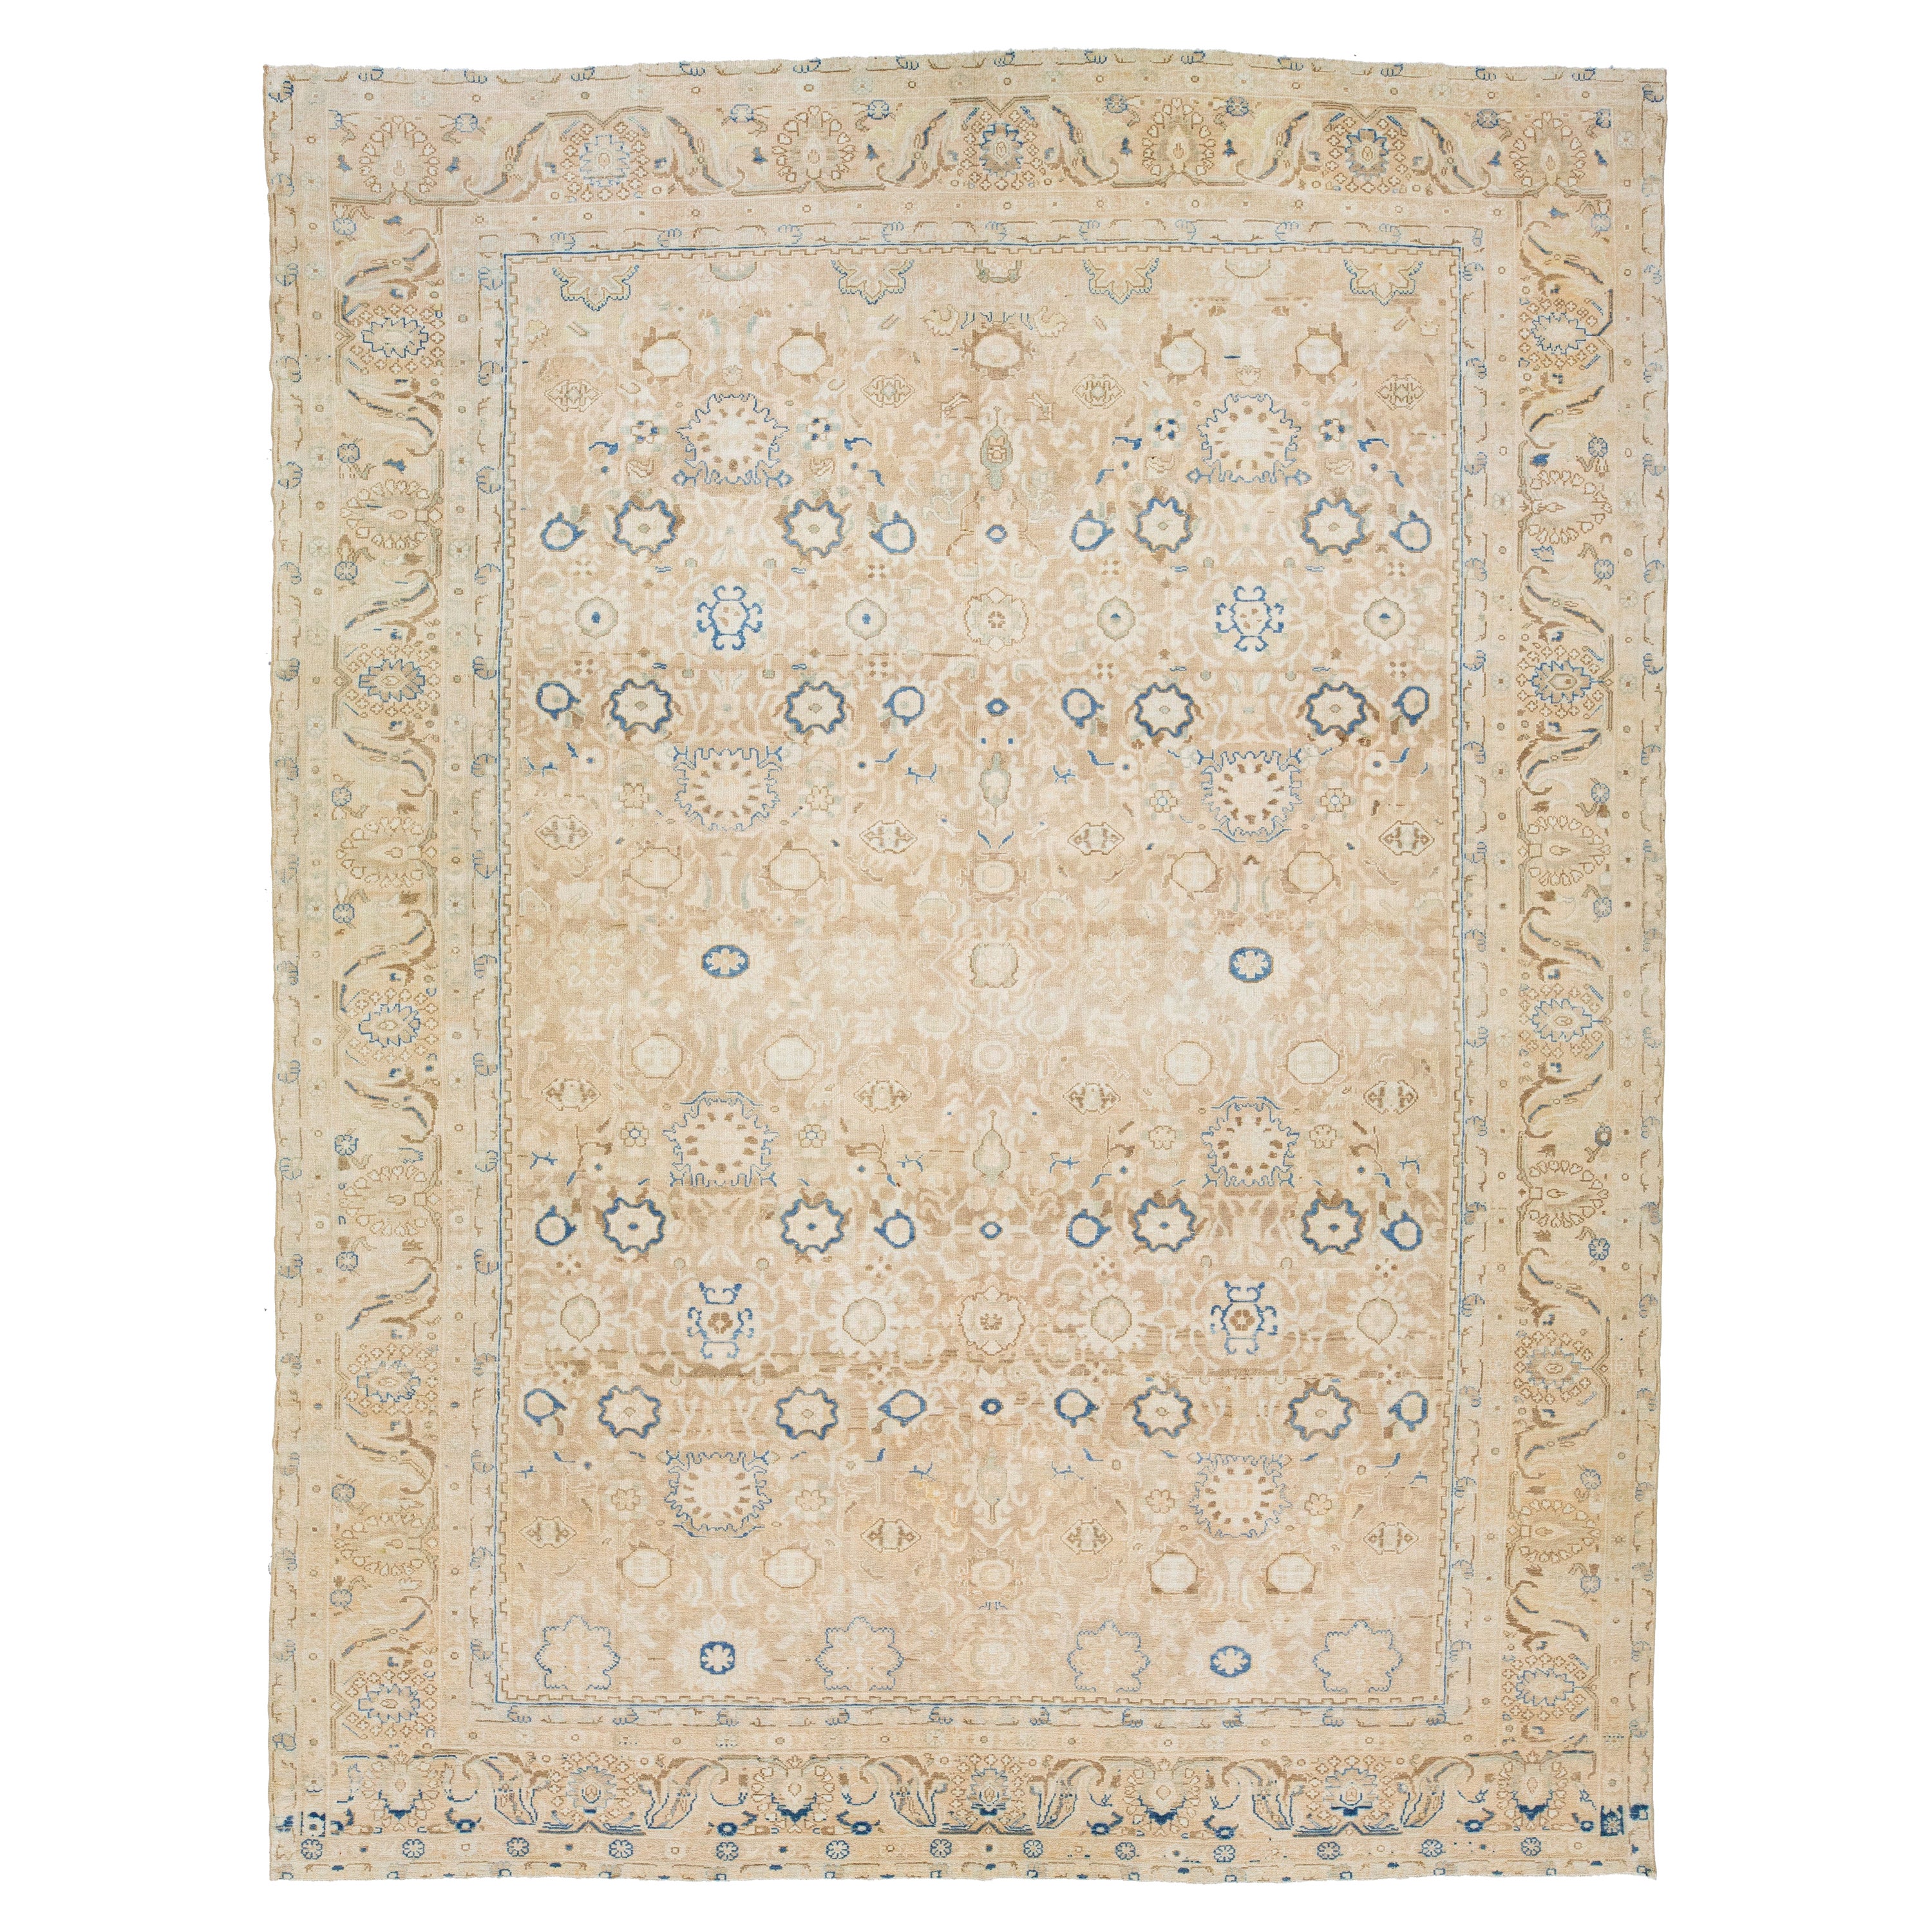 Handmade 1910s Antique Persian Malayer Wool Rug With Beige Color field For Sale